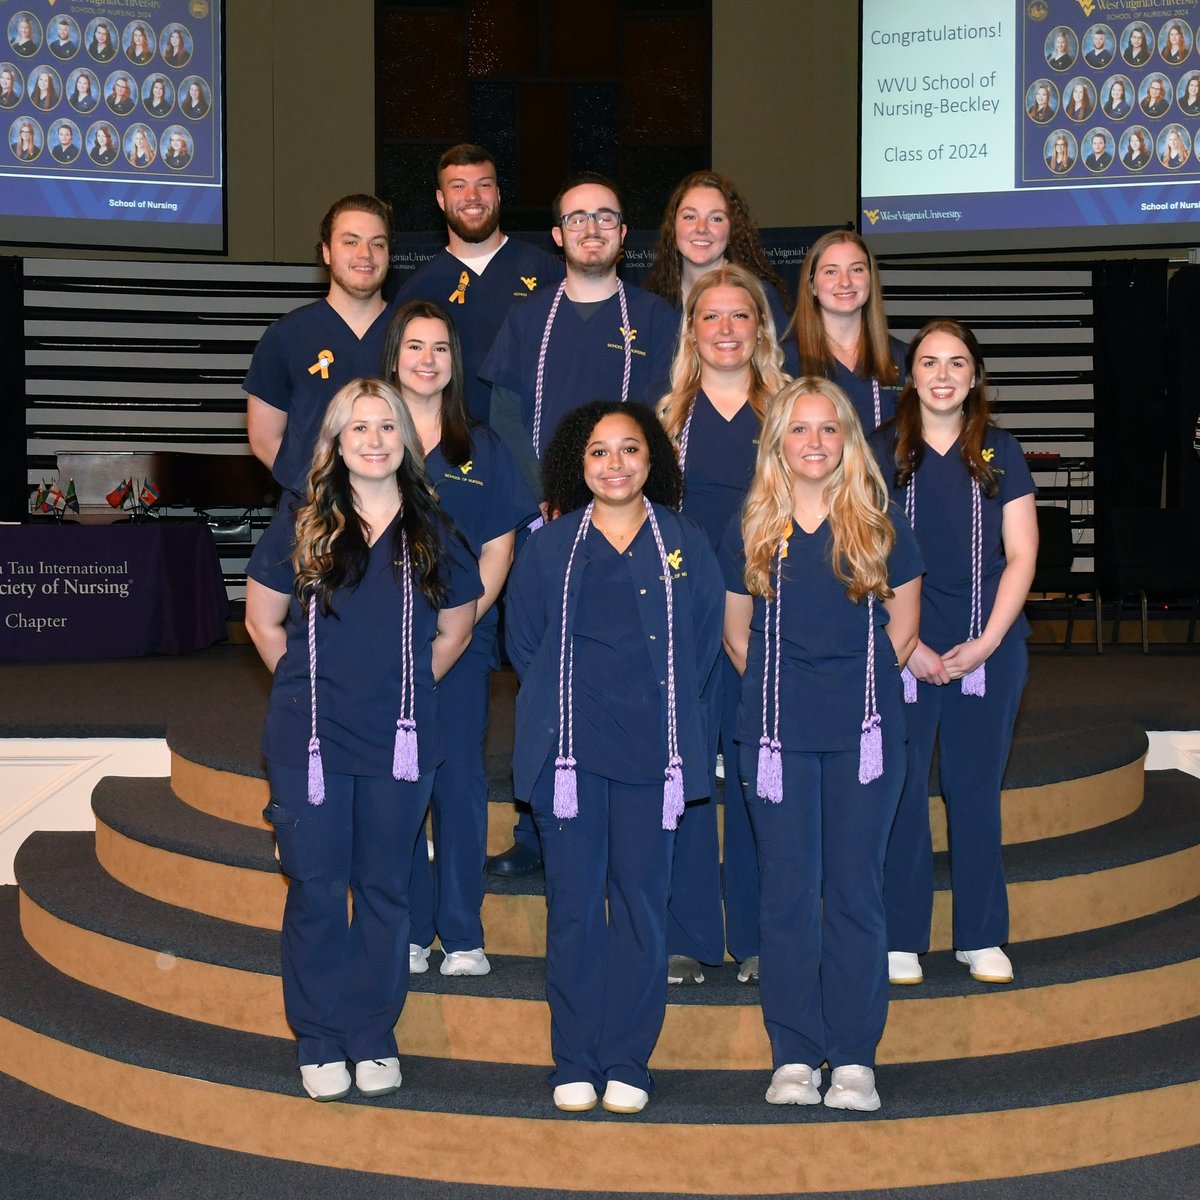 Congratulations to our most recent Sigma Theta Tau inductees at our Beckley Campus! 🩺 @WVU_Tech